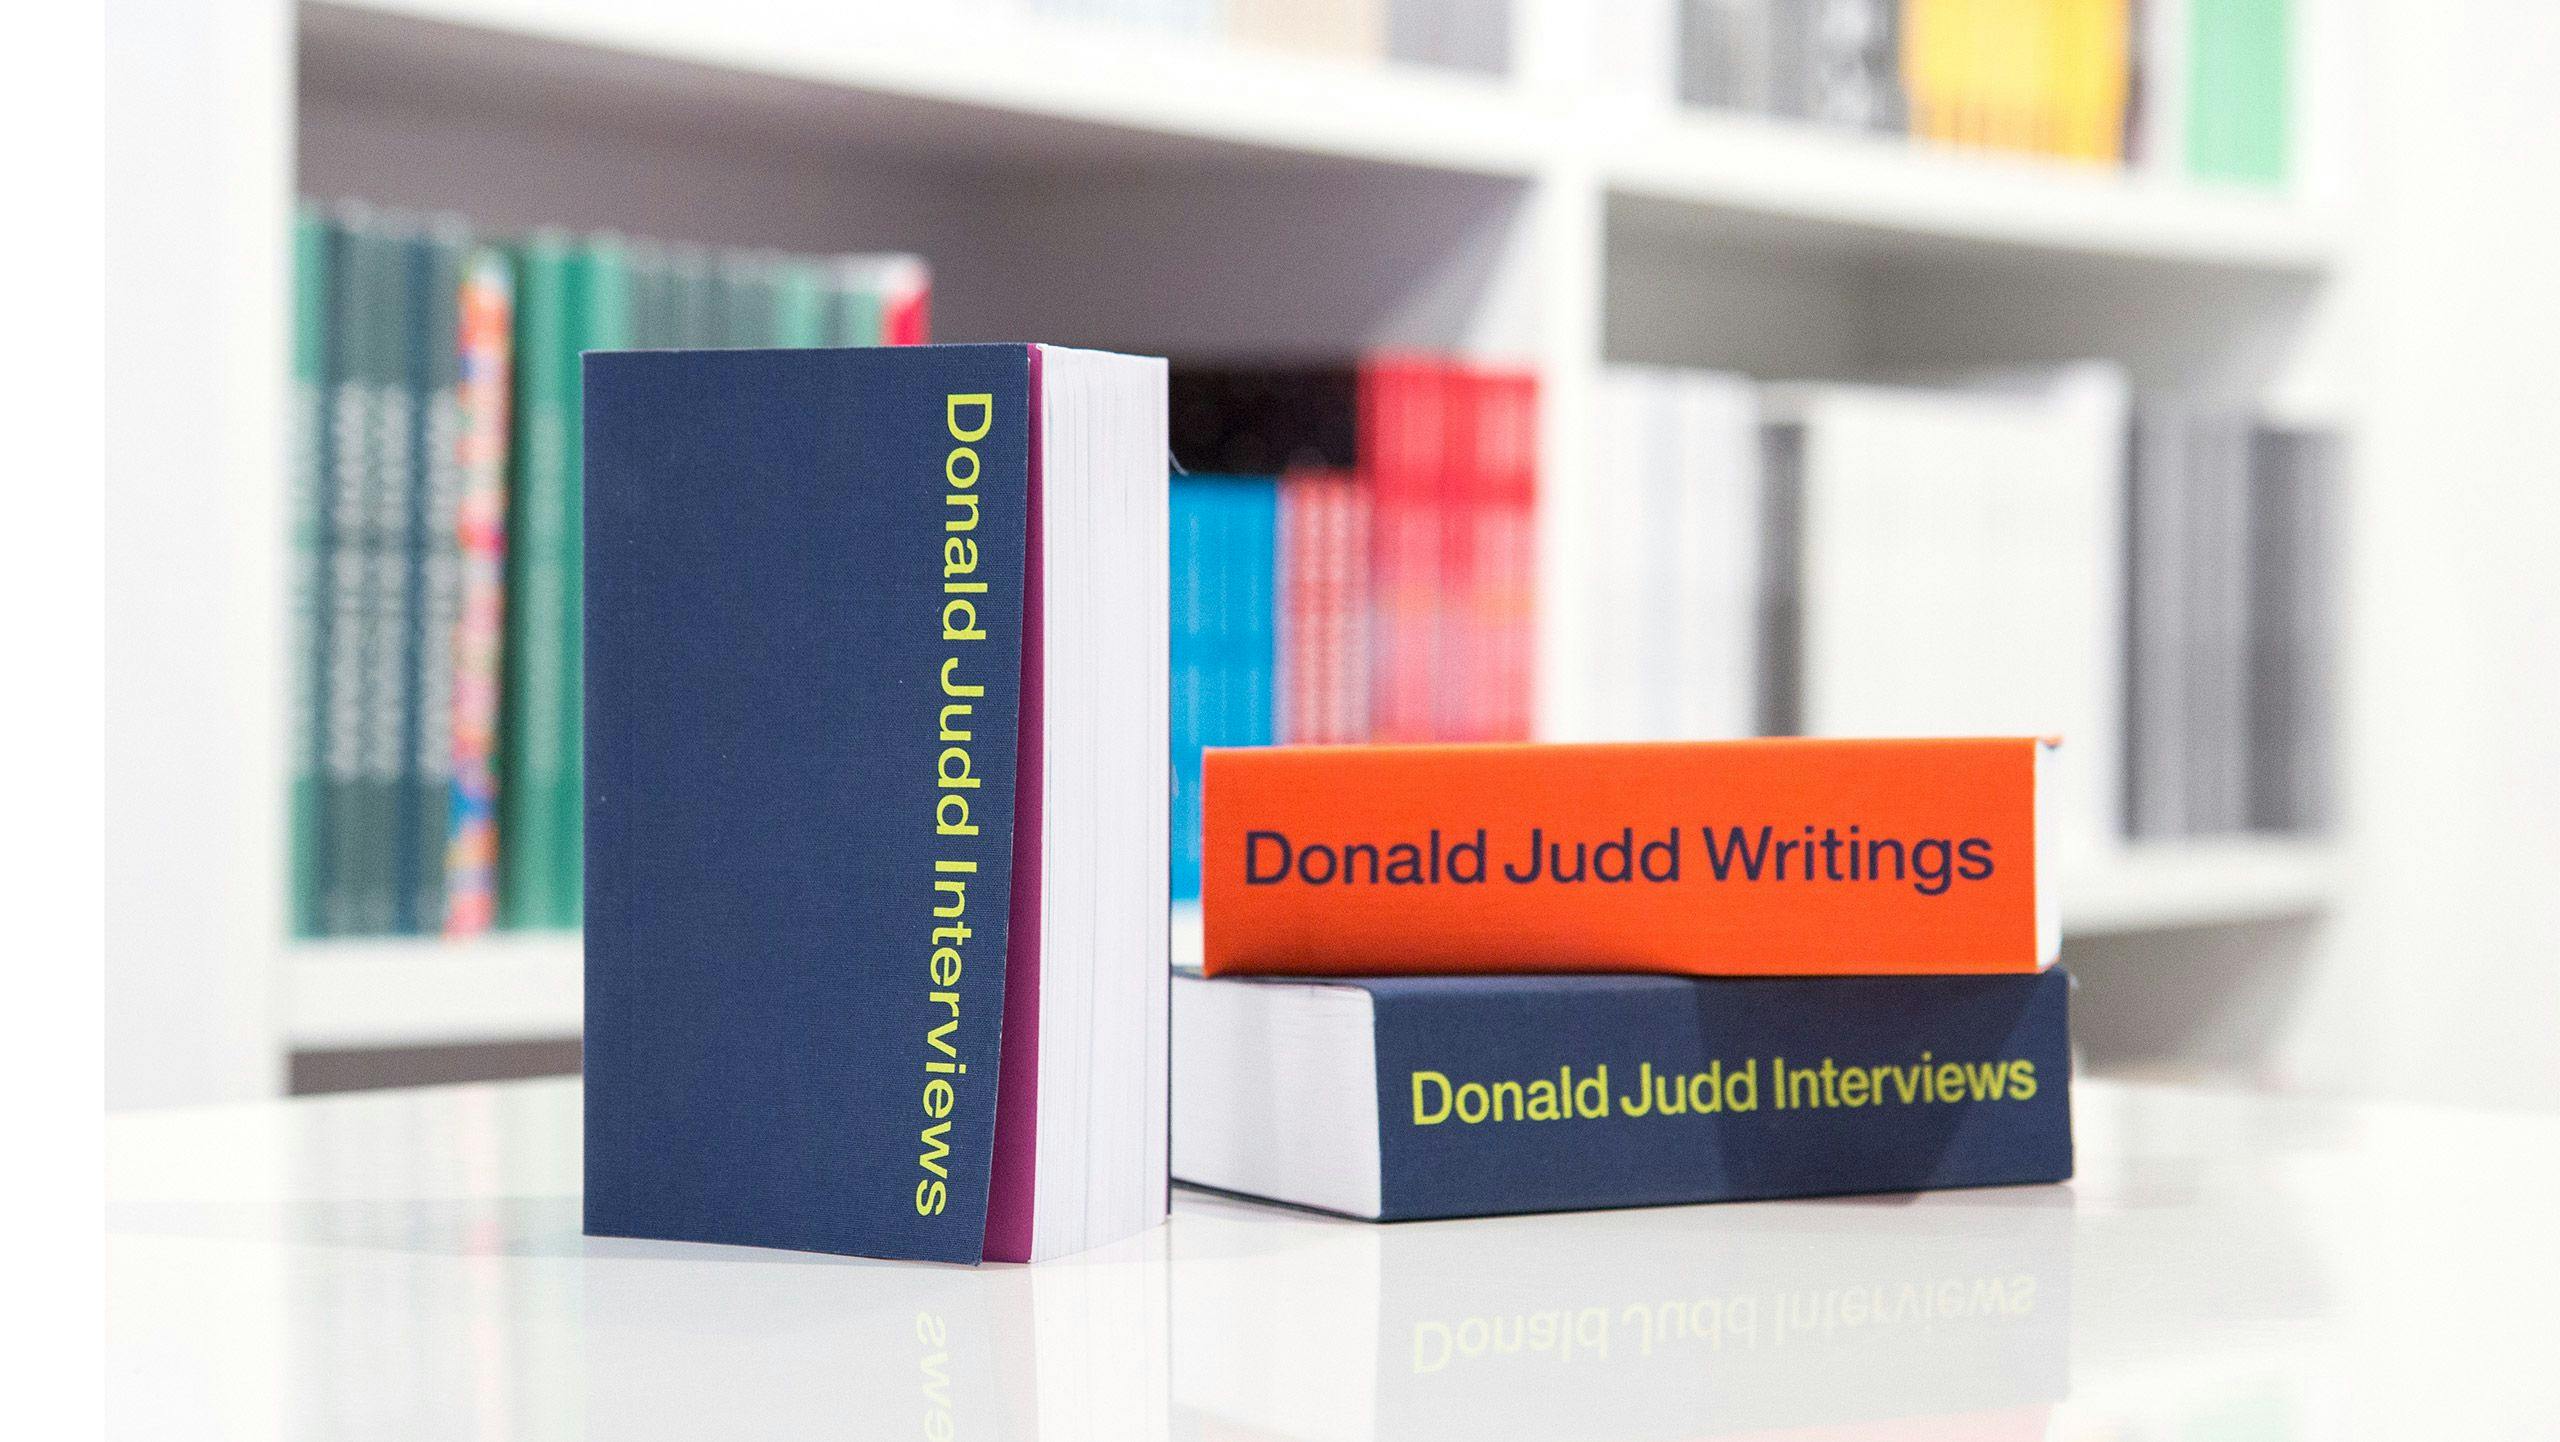 Cover of a book titled Donald Judd Interviews and a book titled Donald Judd Writings, published by David Zwirner Books in 2019.